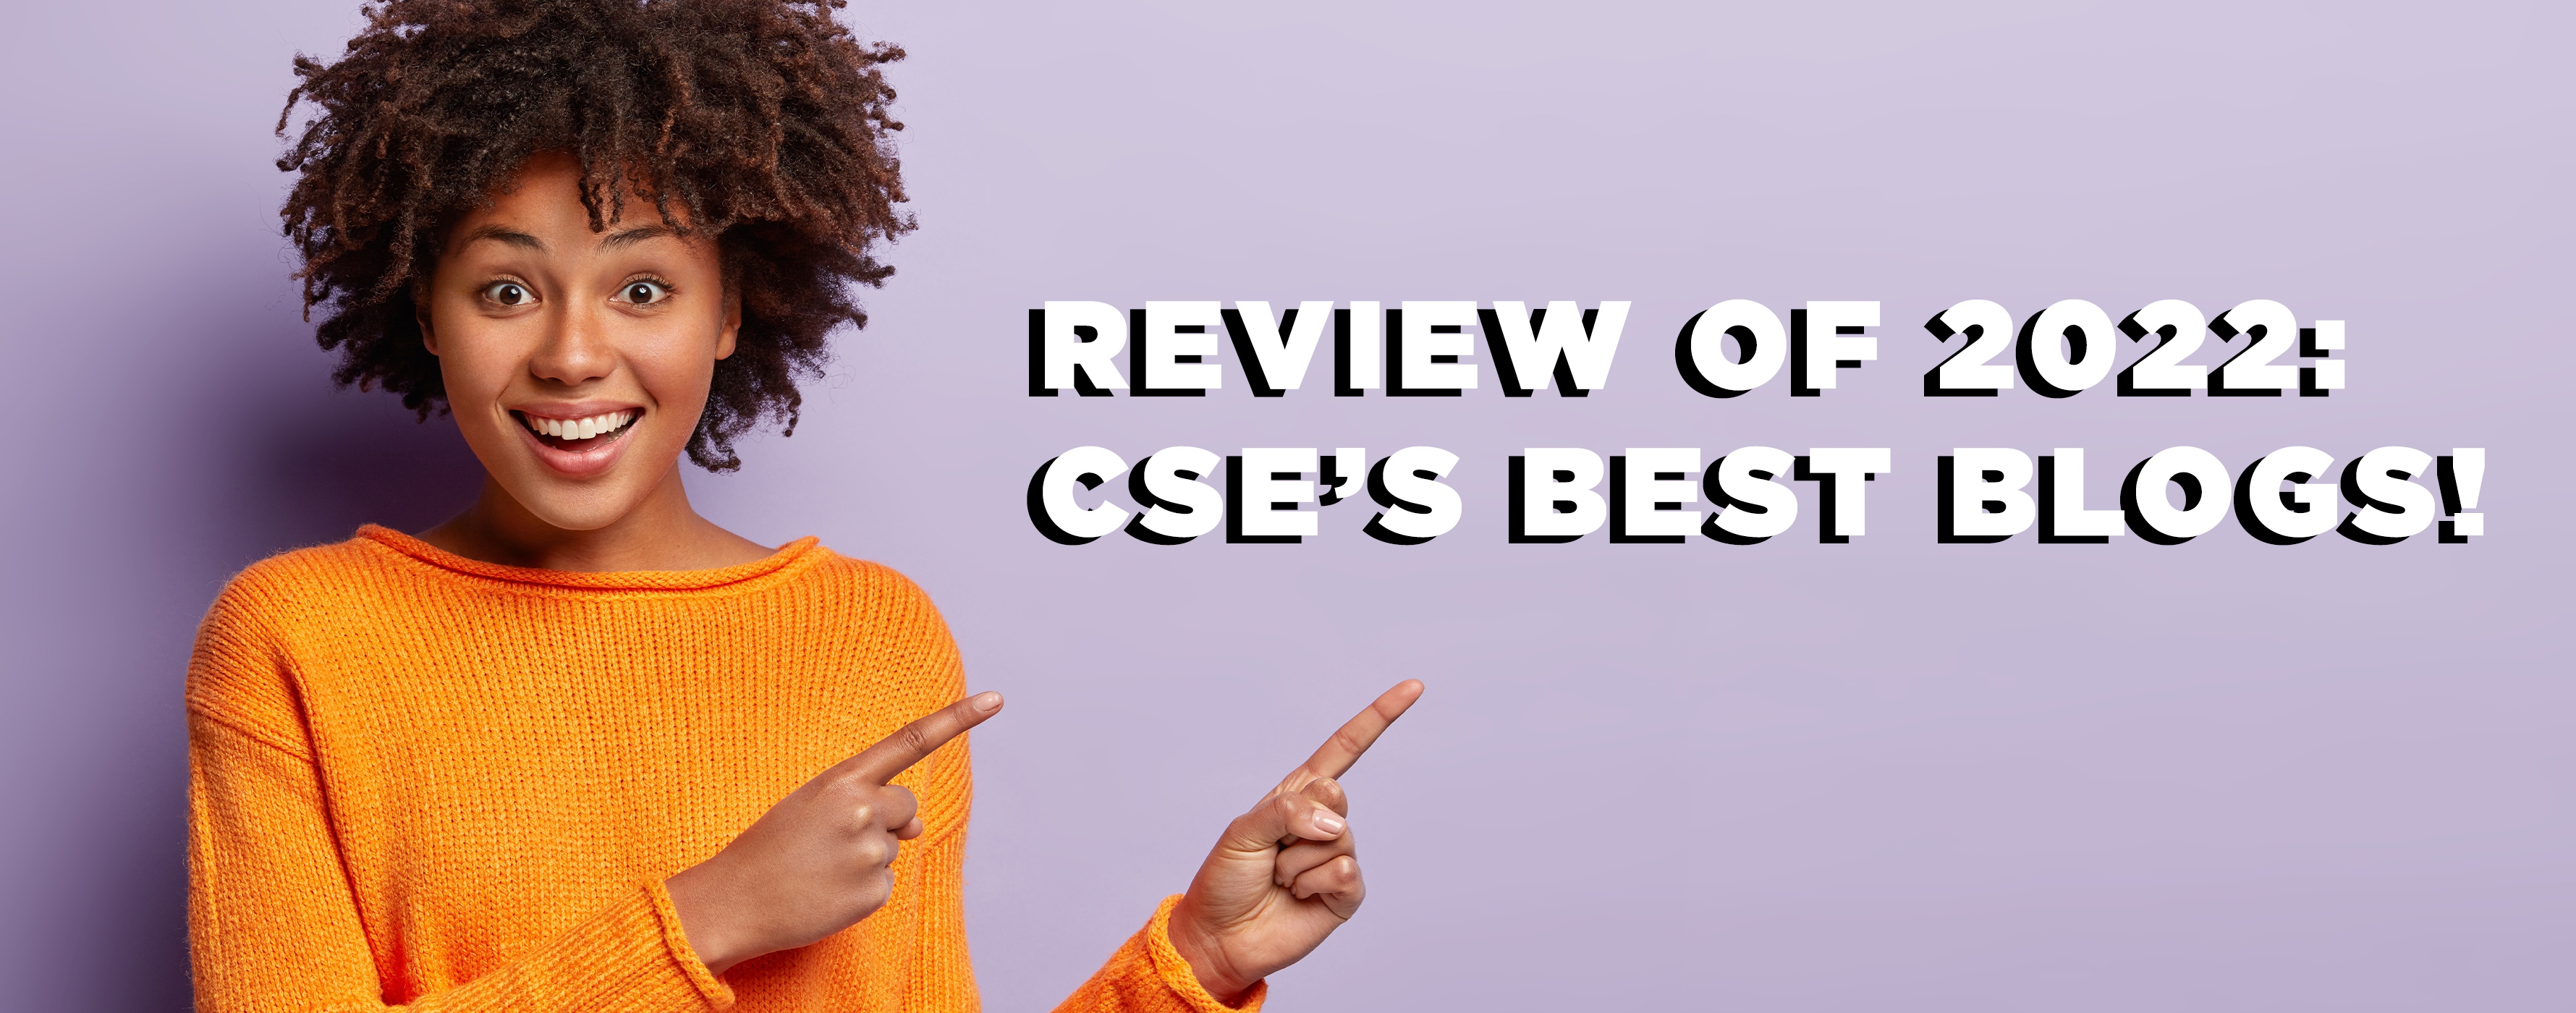 2022 in Review: CSE's Best Blogs